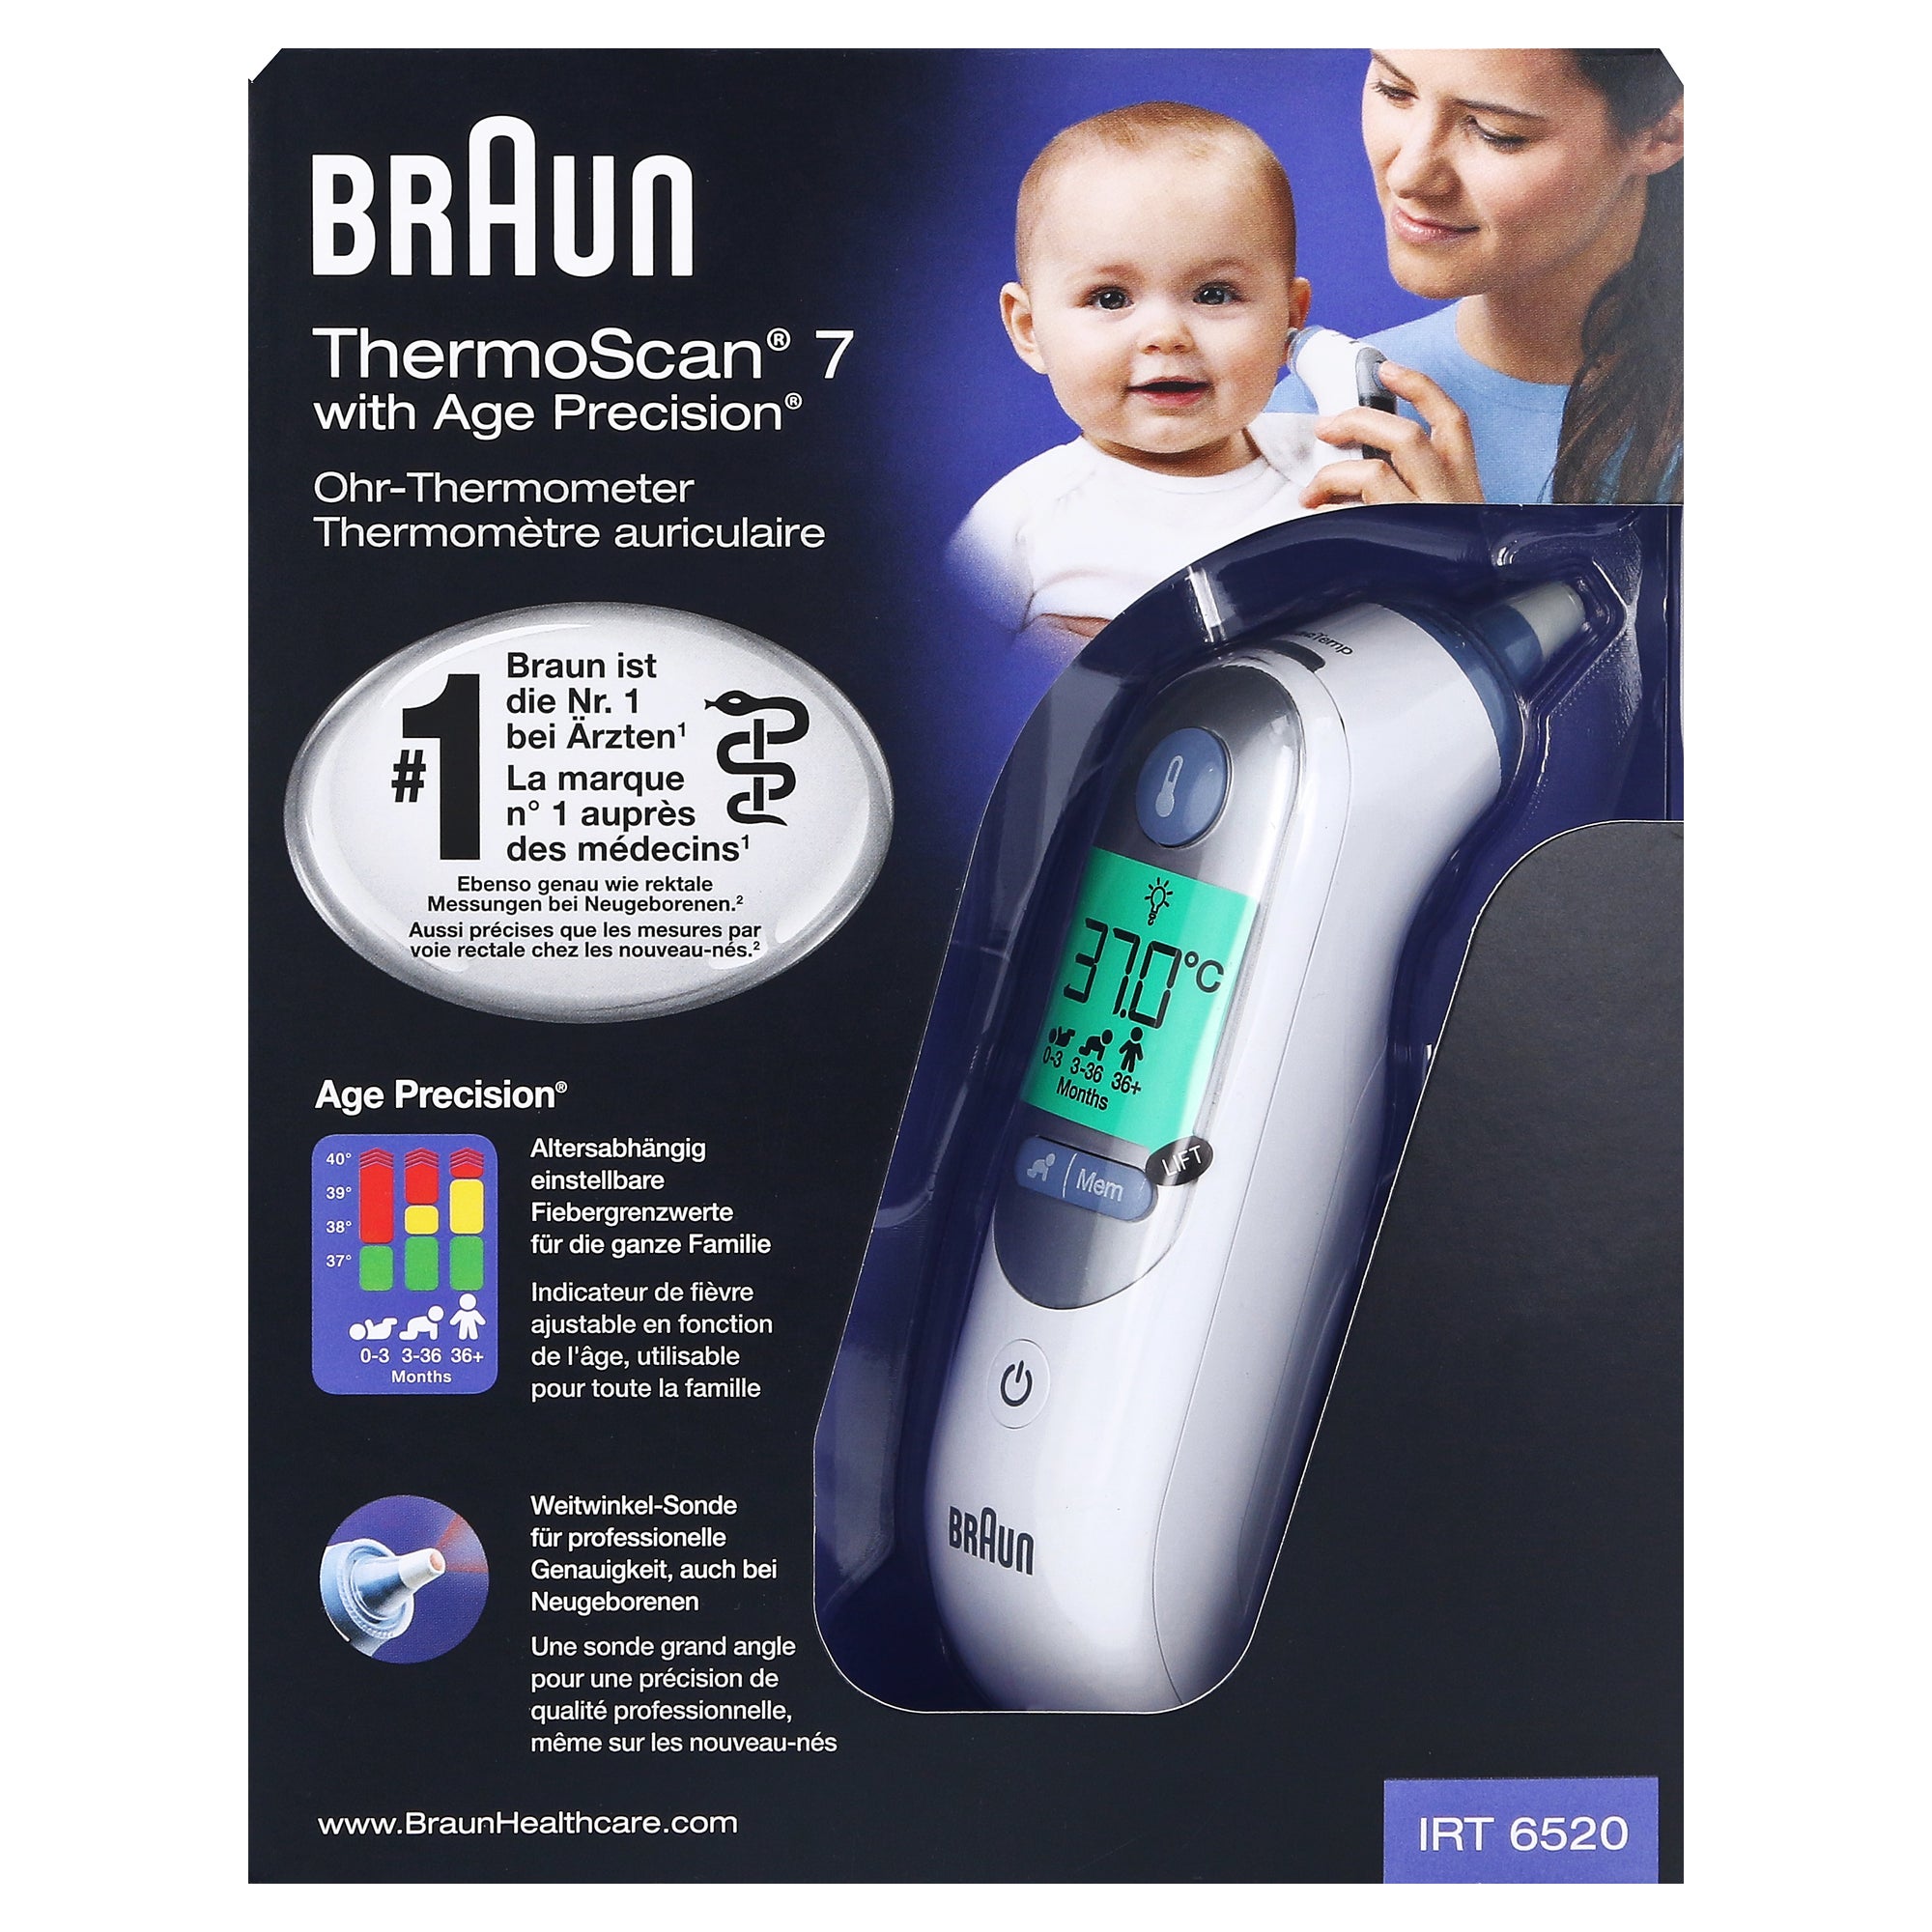 Irt6520 kaufen | 7 Thermoscan St. online DocMorris Ohrthermometer, 1